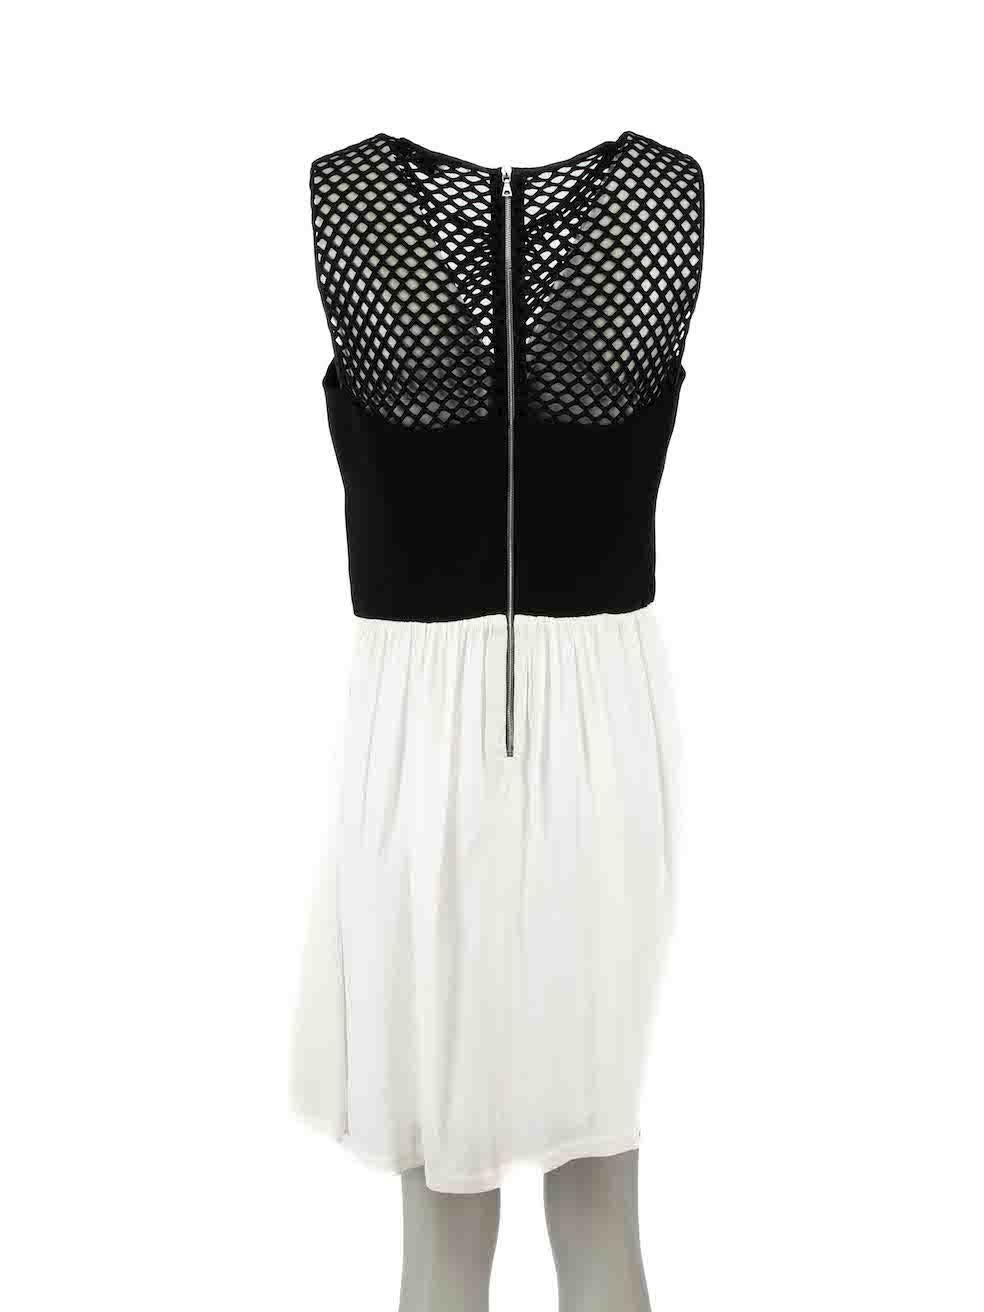 Sandro Cut-Out Detail Mini Dress Size M In Excellent Condition For Sale In London, GB